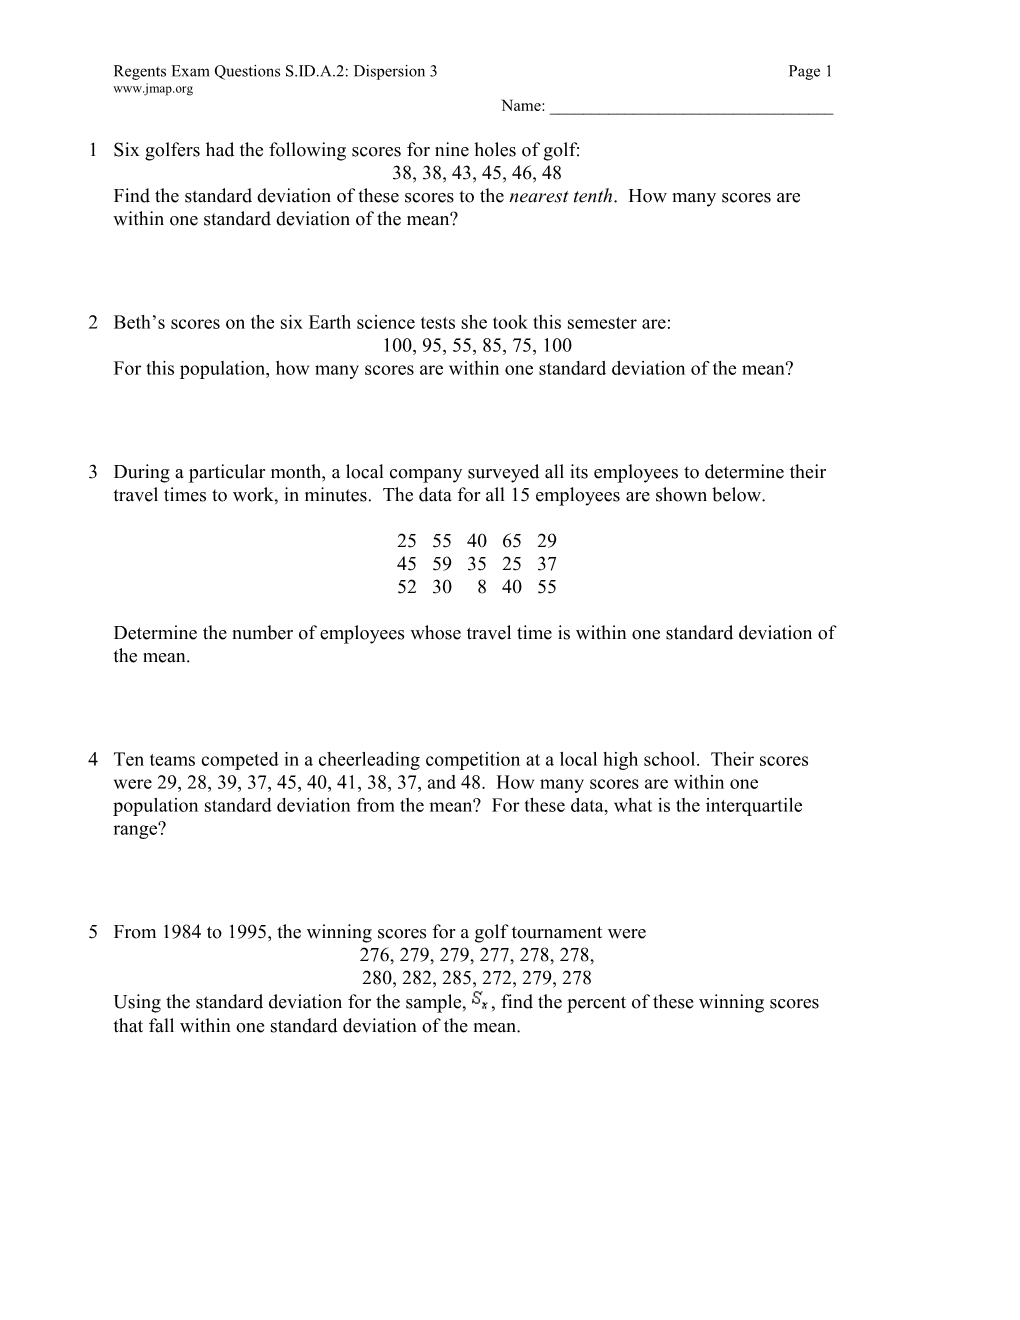 Regents Exam Questions S.ID.A.2: Dispersion 3Page 1